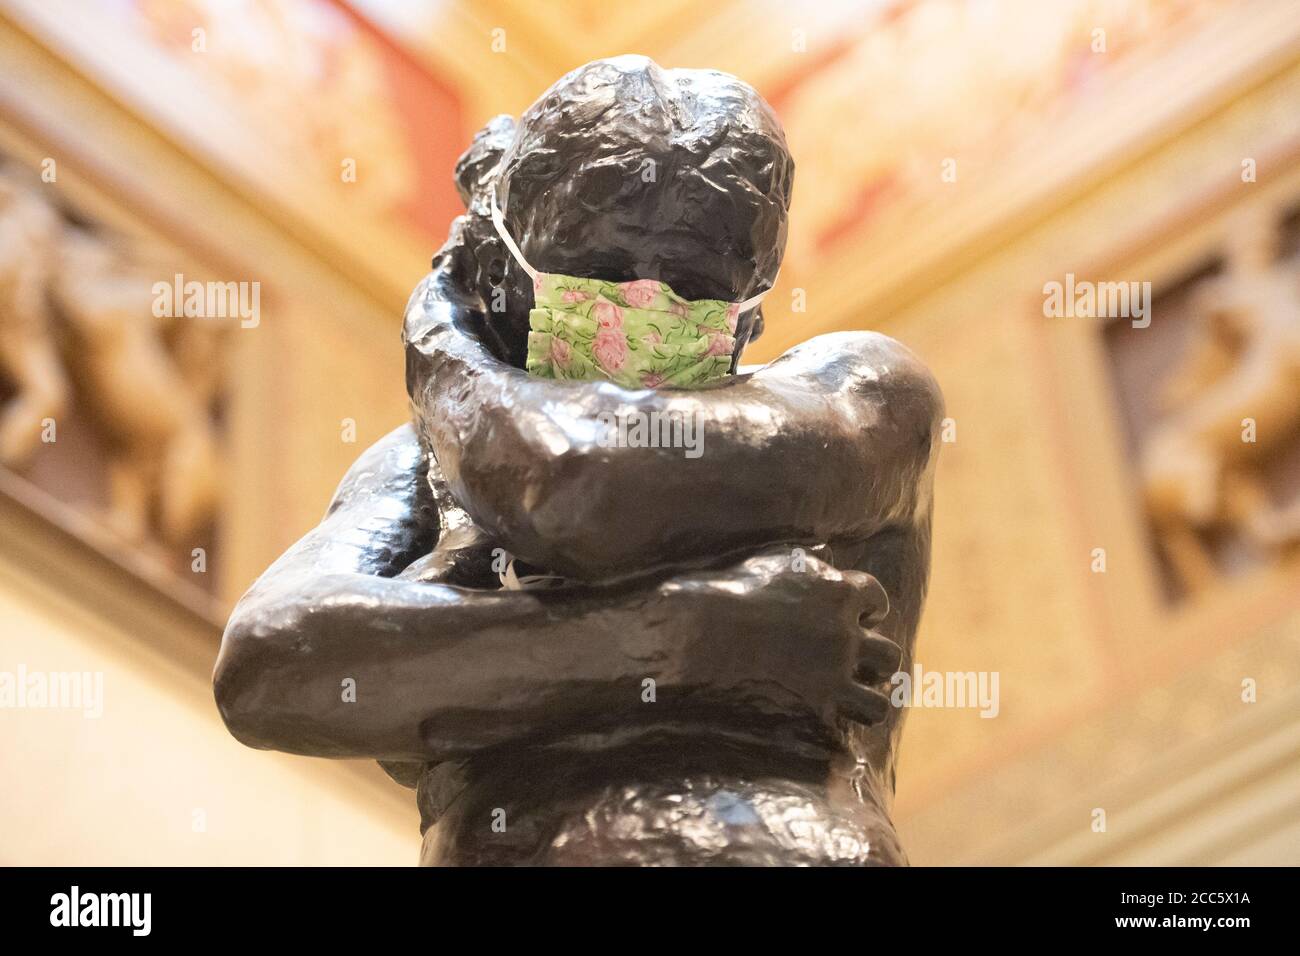 Manchester, UK. 19th Aug, 2020. A face covering is seen on part of the Rodin sculpture 'Eve and Age of Bronze' as Manchester Art Gallery prepares to reopen its doors to the public on Thursday 20th August following temporary closure during the Covid-19 outbreak Credit: Russell Hart/Alamy Live News Stock Photo